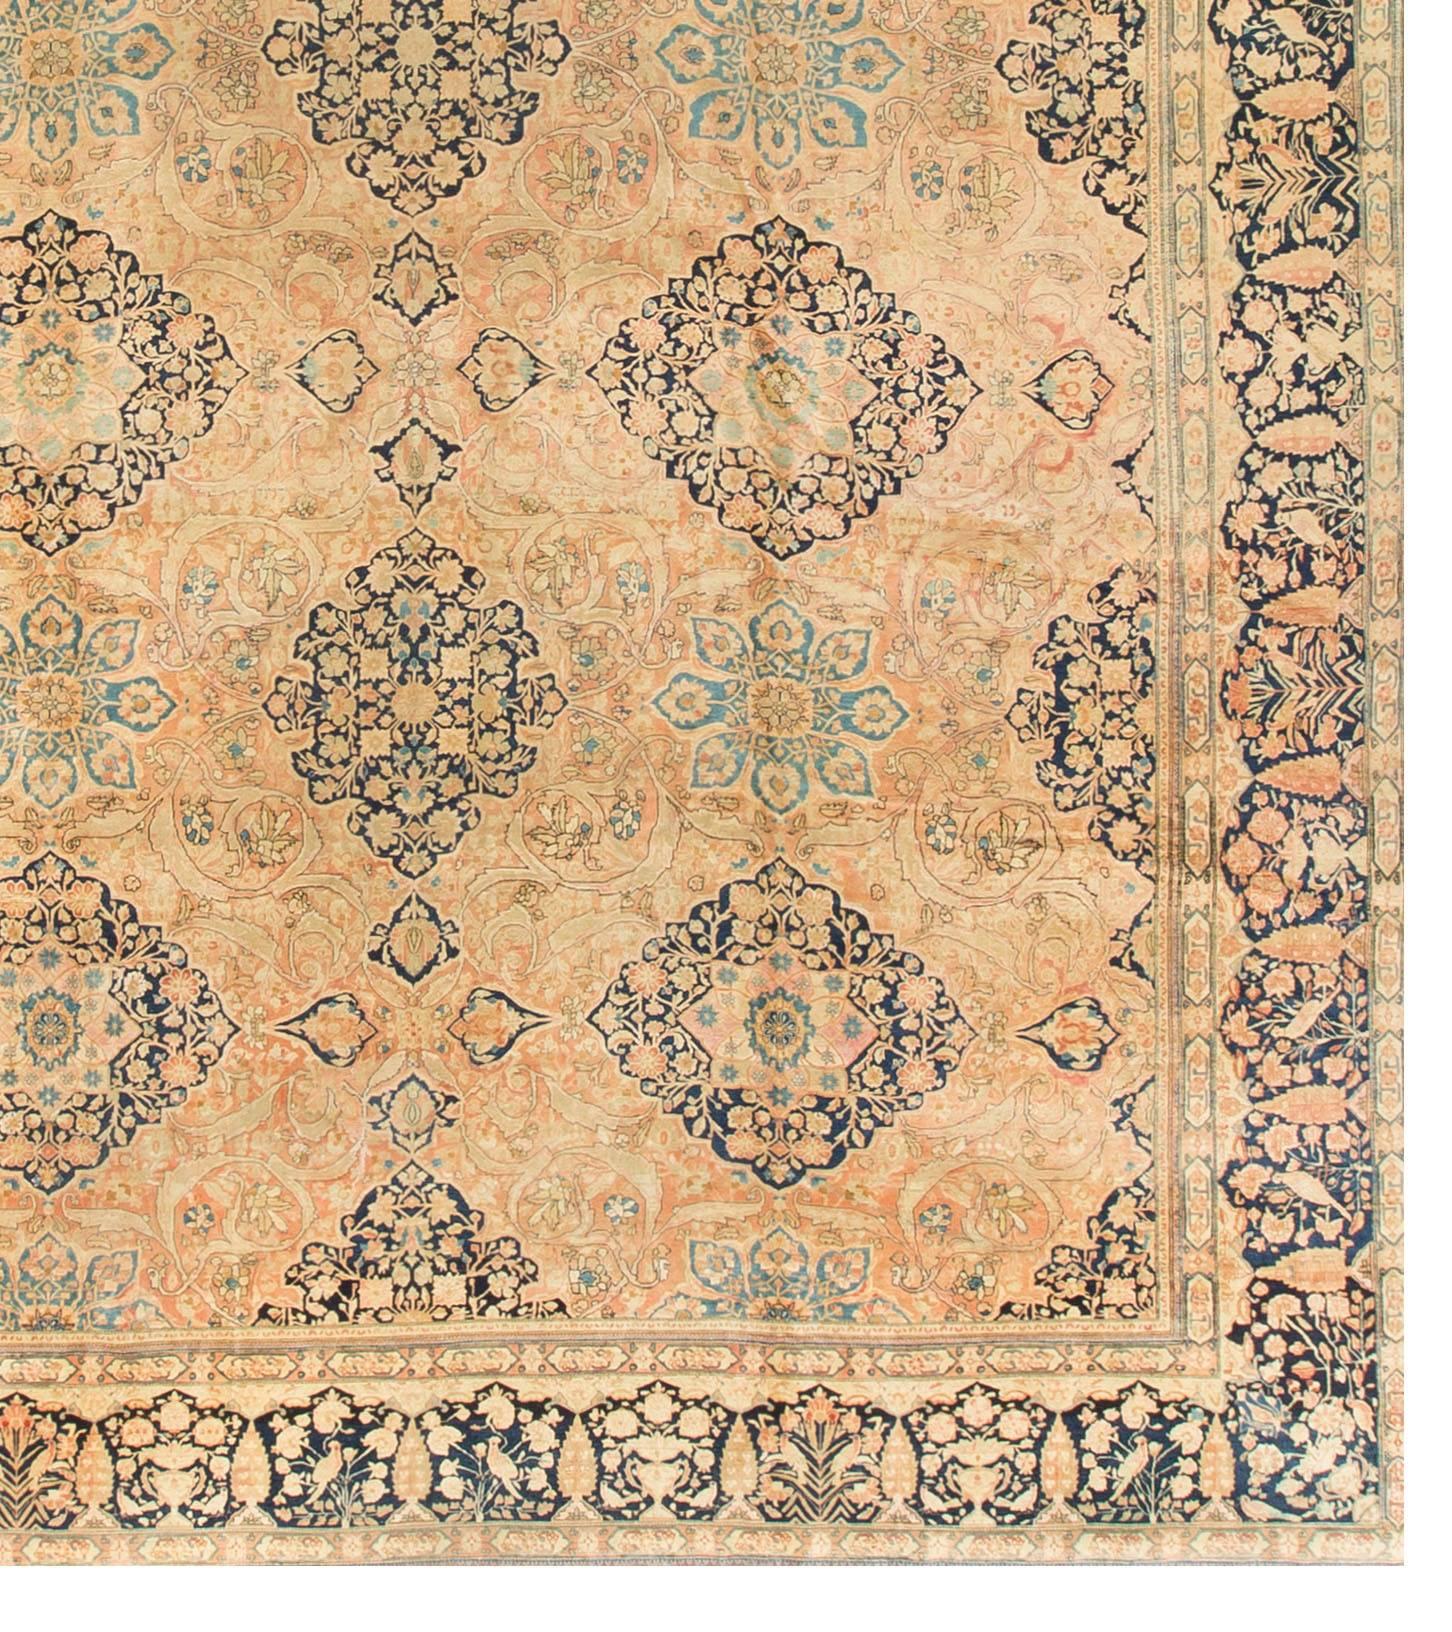 Hand-Knotted Antique Luxury Persian Kashan Mohtashem Rug, circa 1890, Size 12'6 x 19'2 For Sale